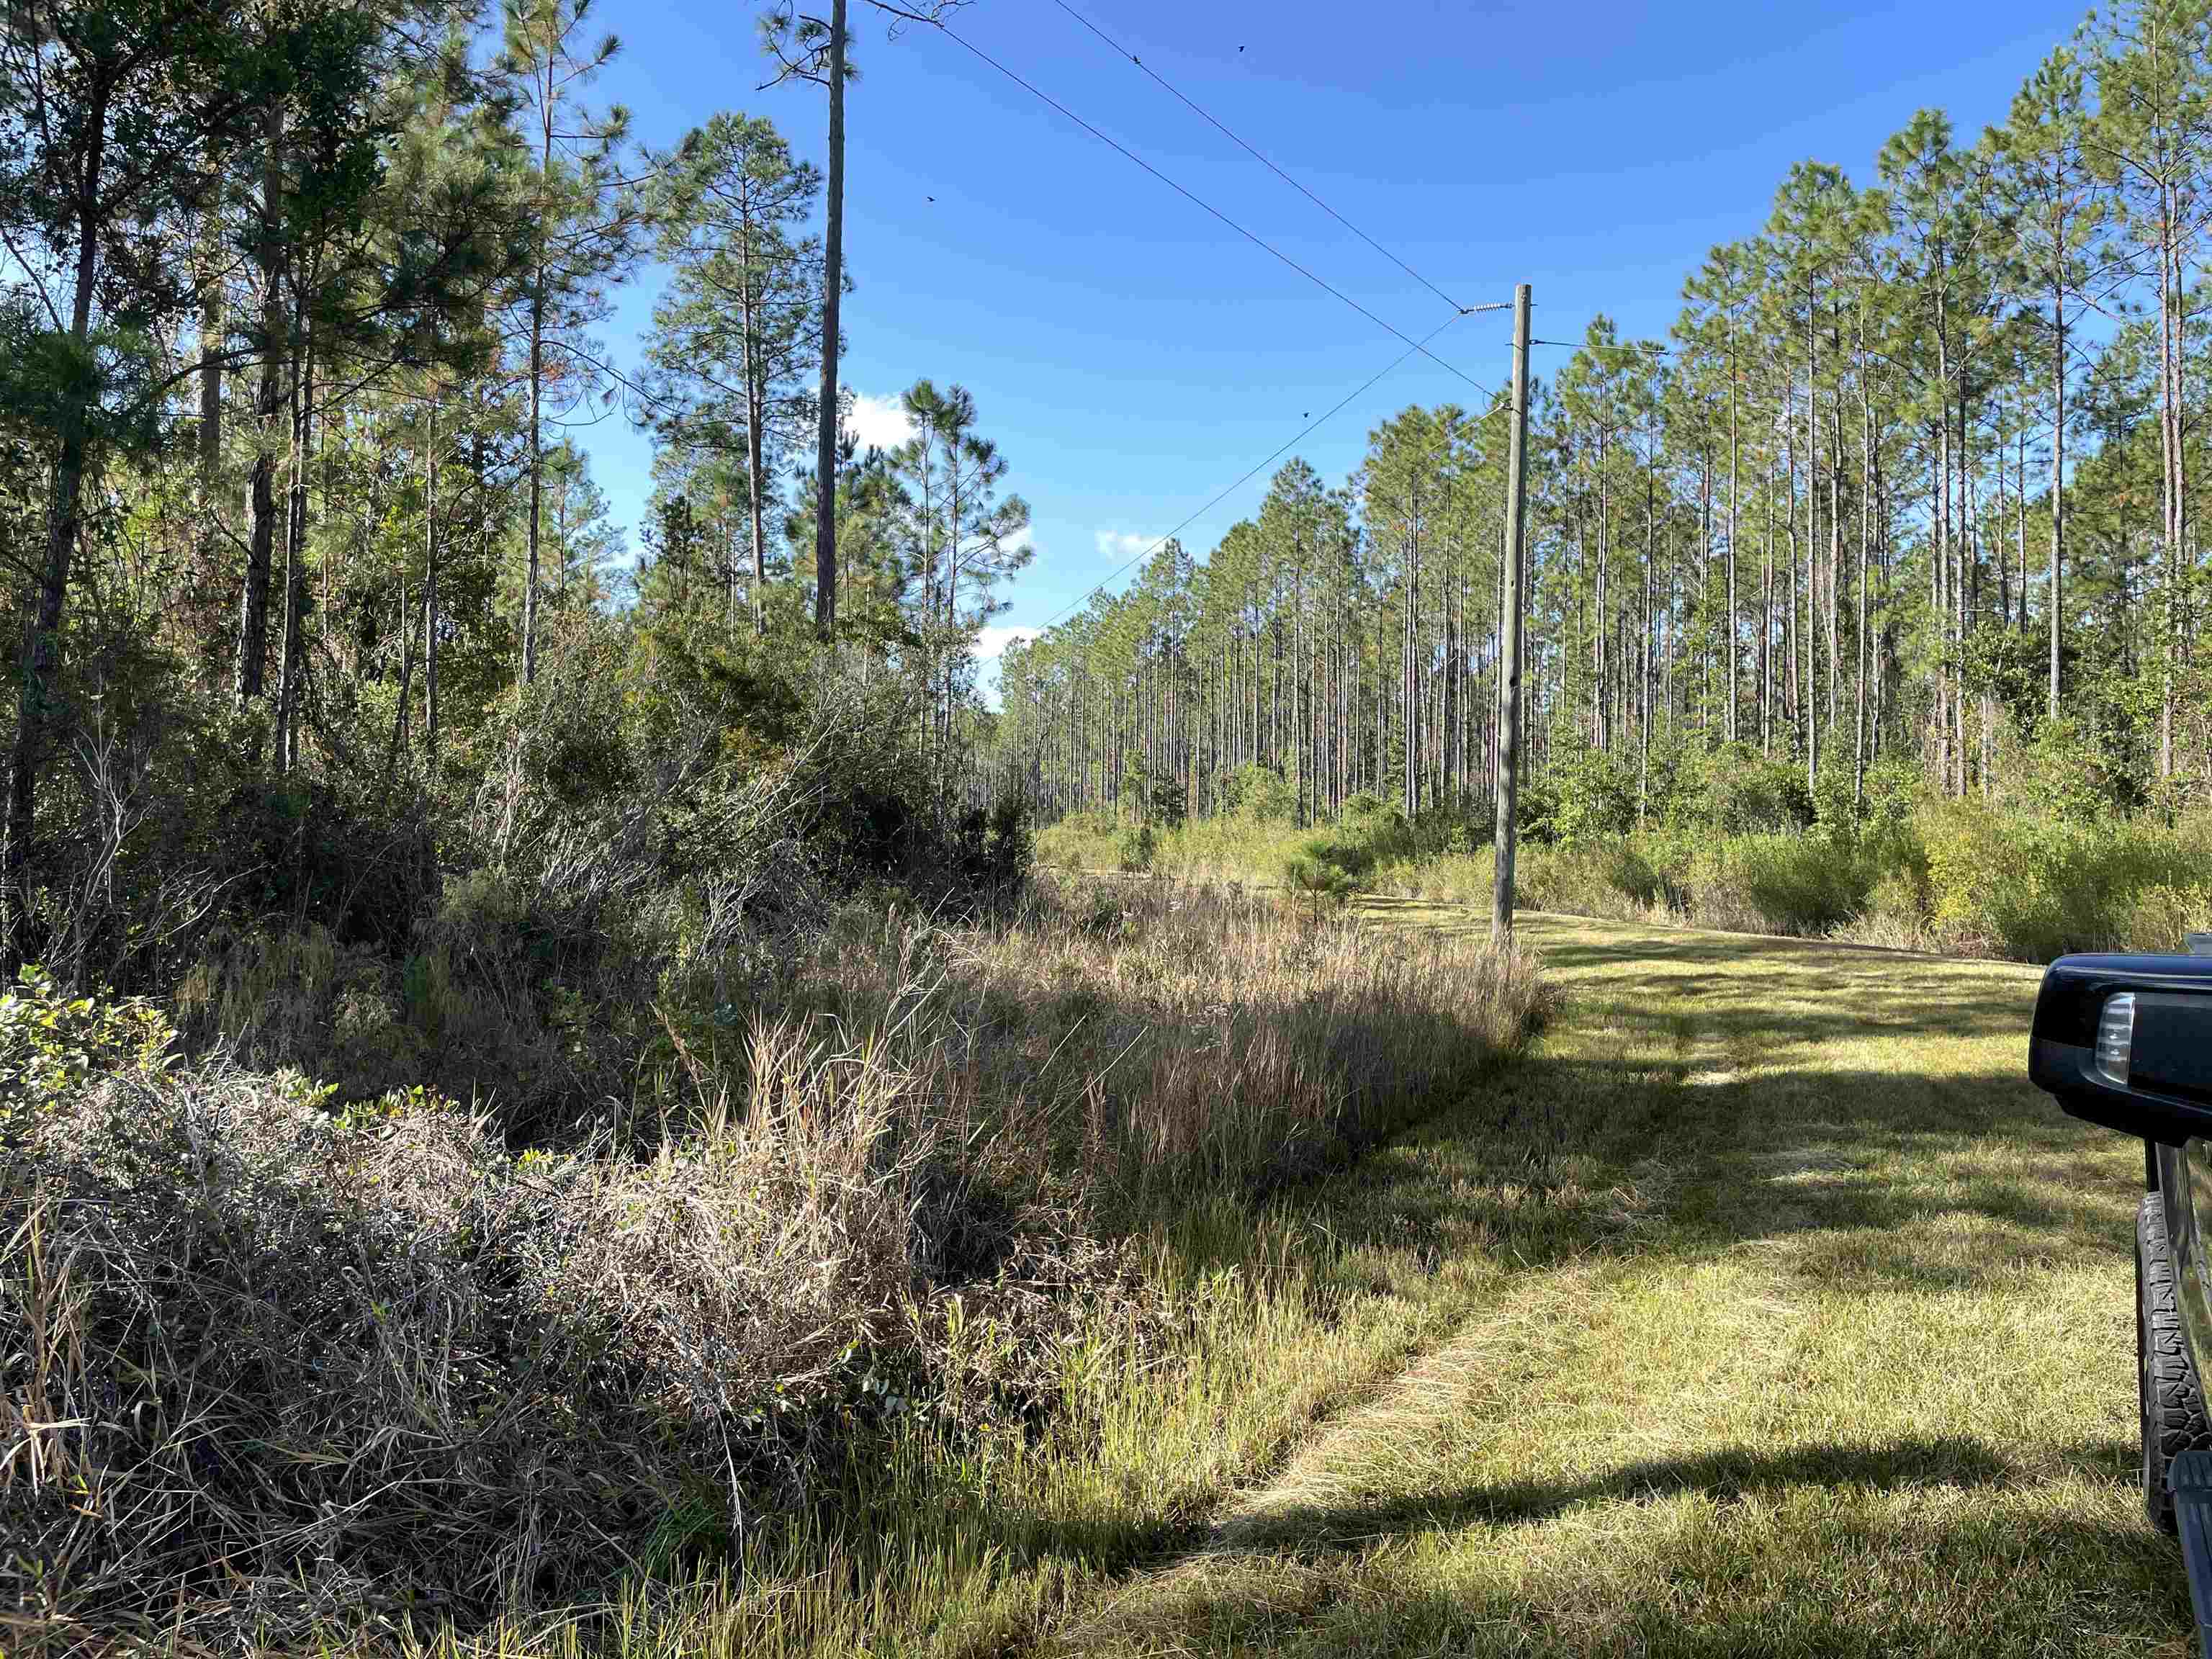 Pier,GREENVILLE,Florida 32331,Lots and land,Pier,365676